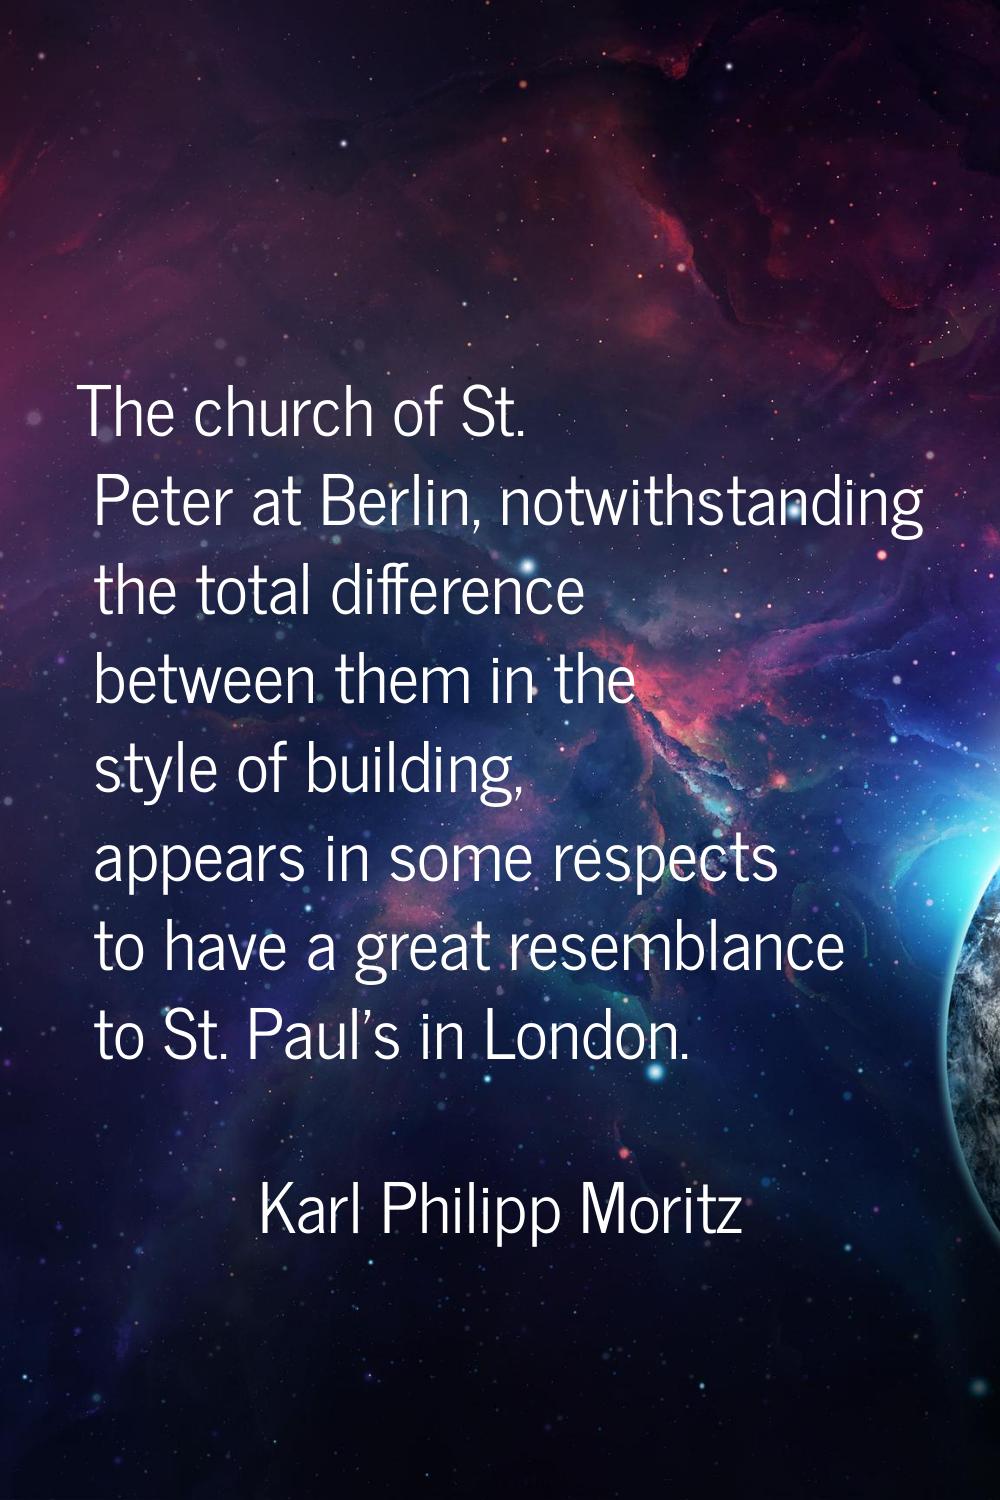 The church of St. Peter at Berlin, notwithstanding the total difference between them in the style o